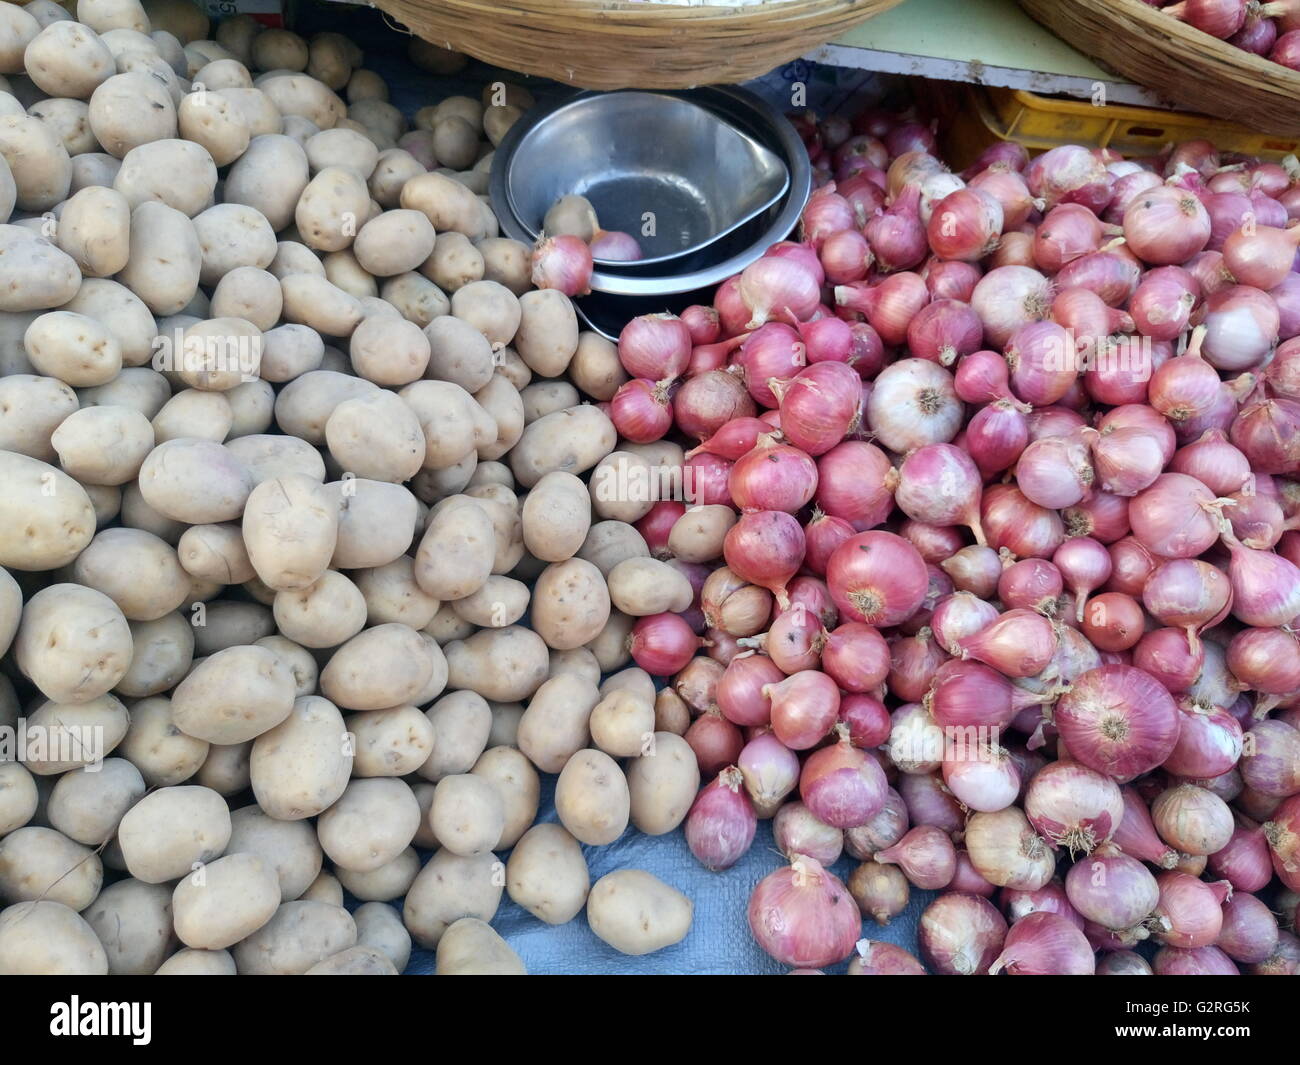 Full frame shot of potatoes and onions for sale Stock Photo